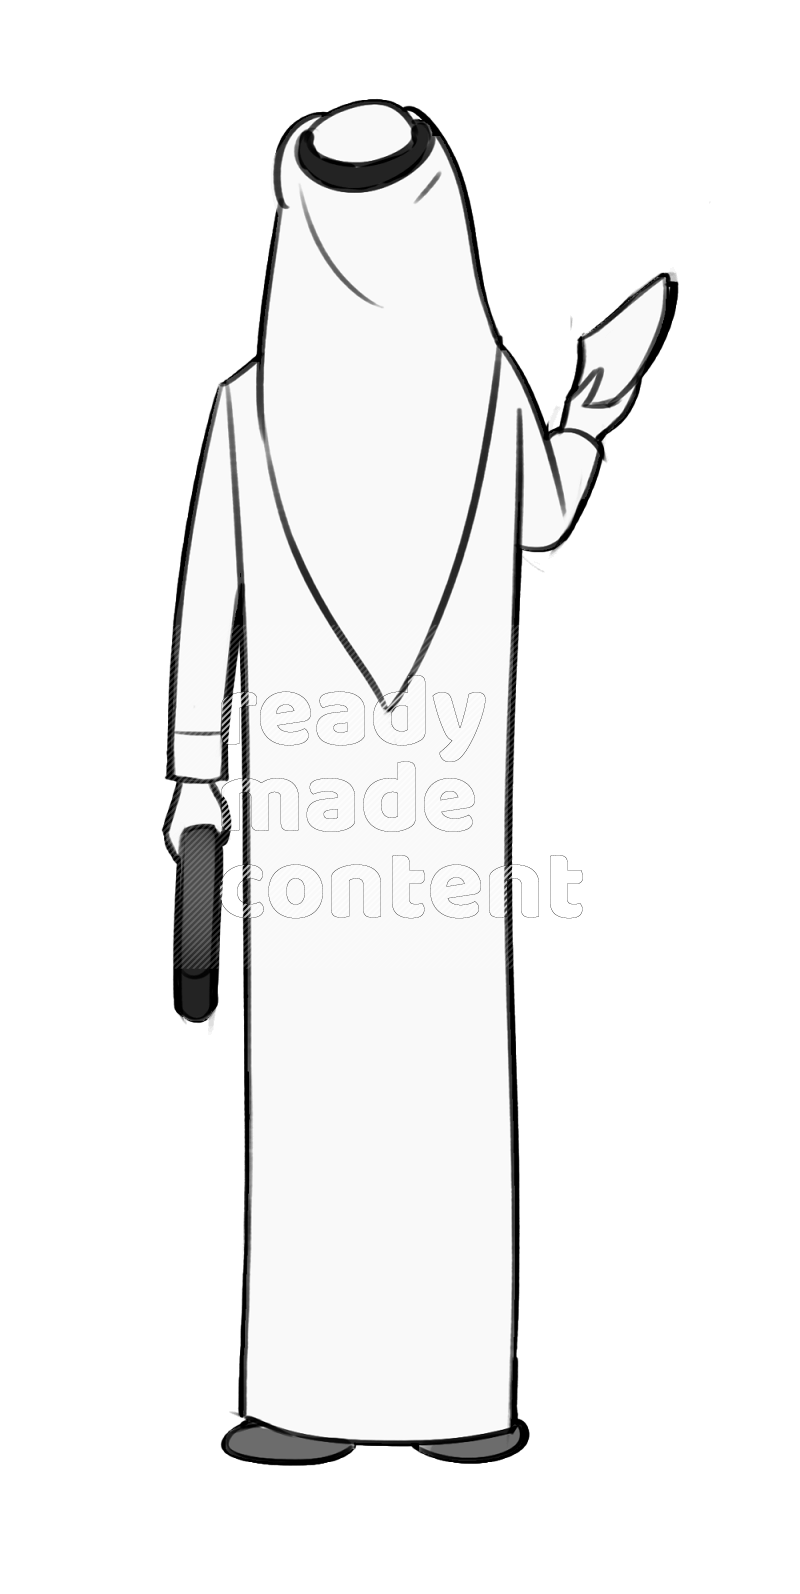 Saudi man holding a file holding a briefcase standing different angles eye level